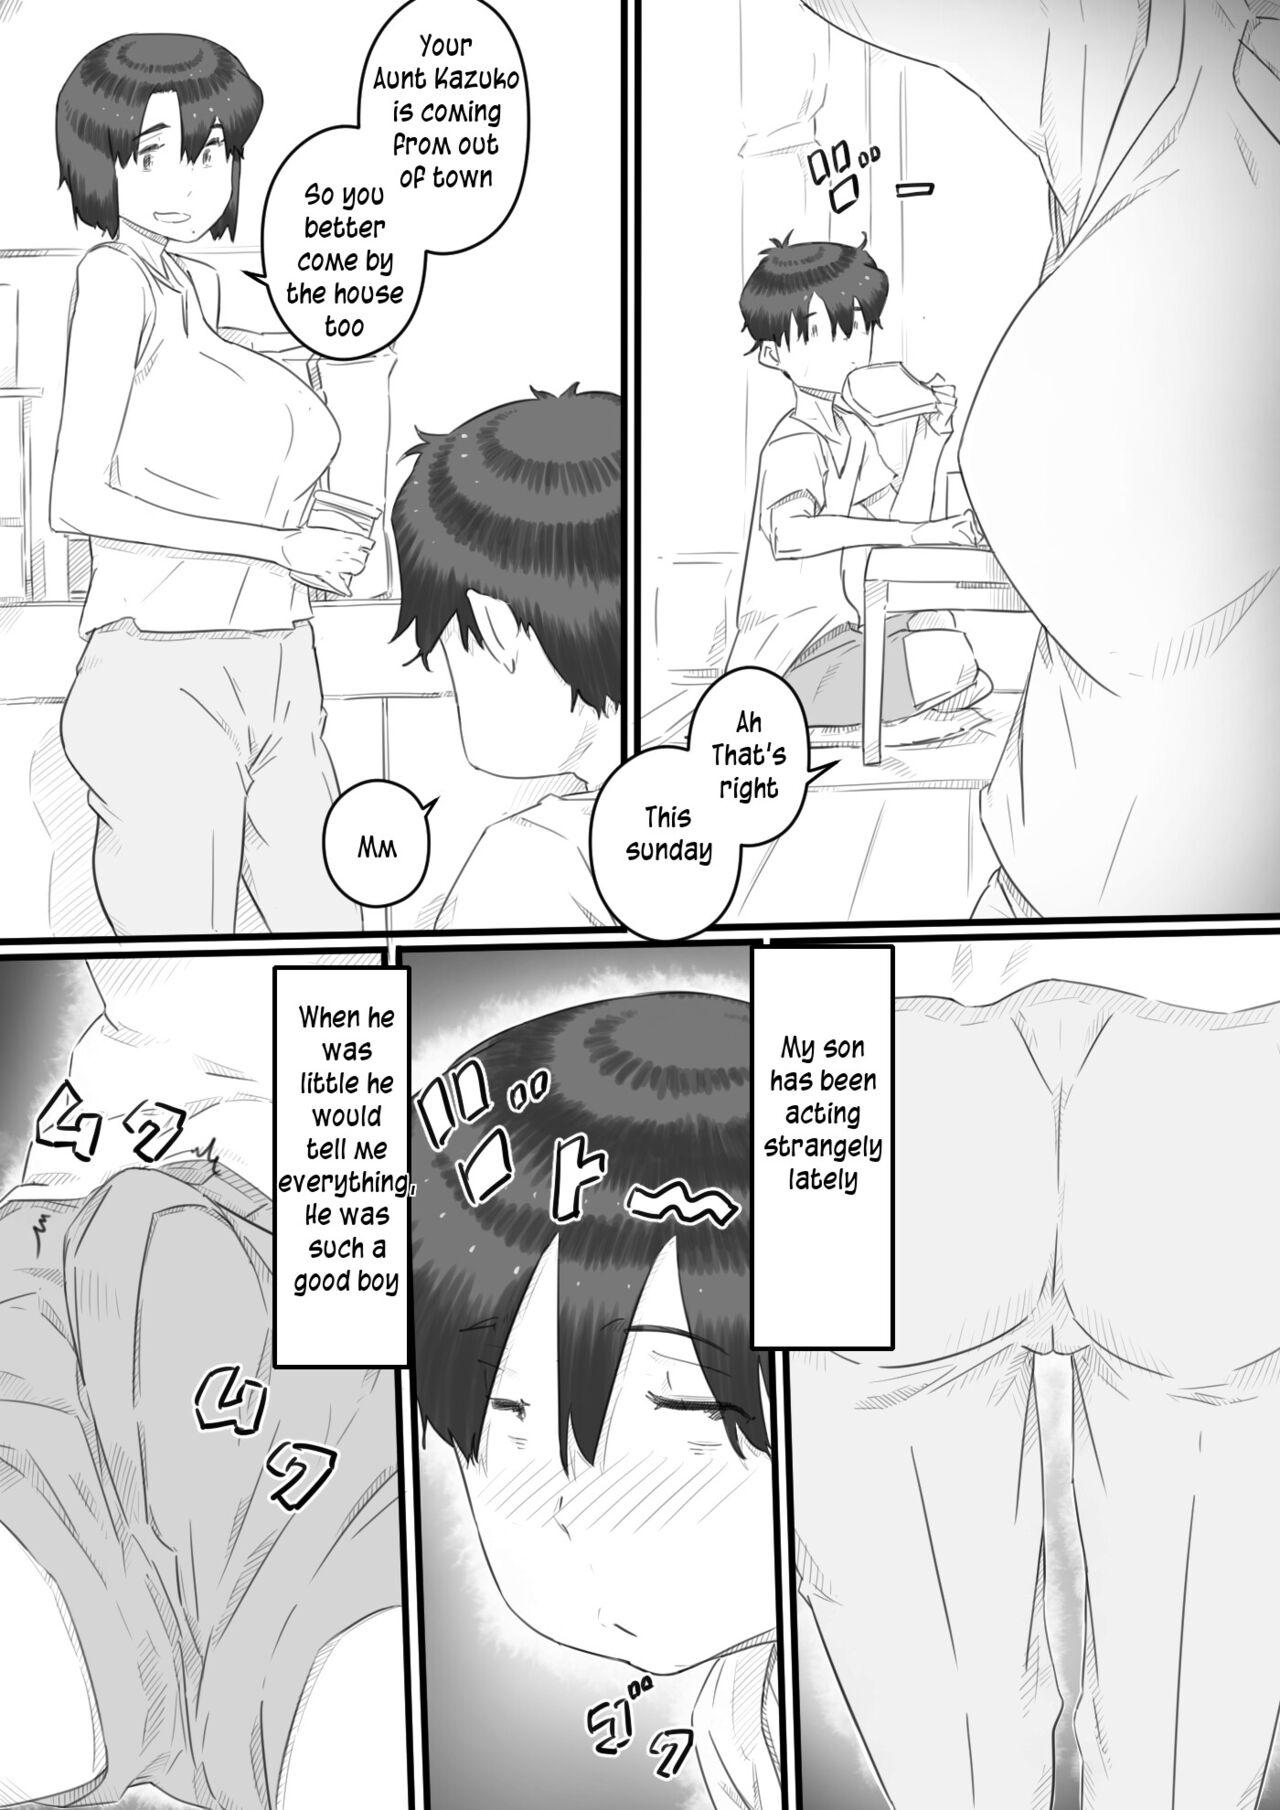 Exhibitionist Hitorigurashi no Musuko no Heya de | Staying over at my son's apartment Glamour - Page 3